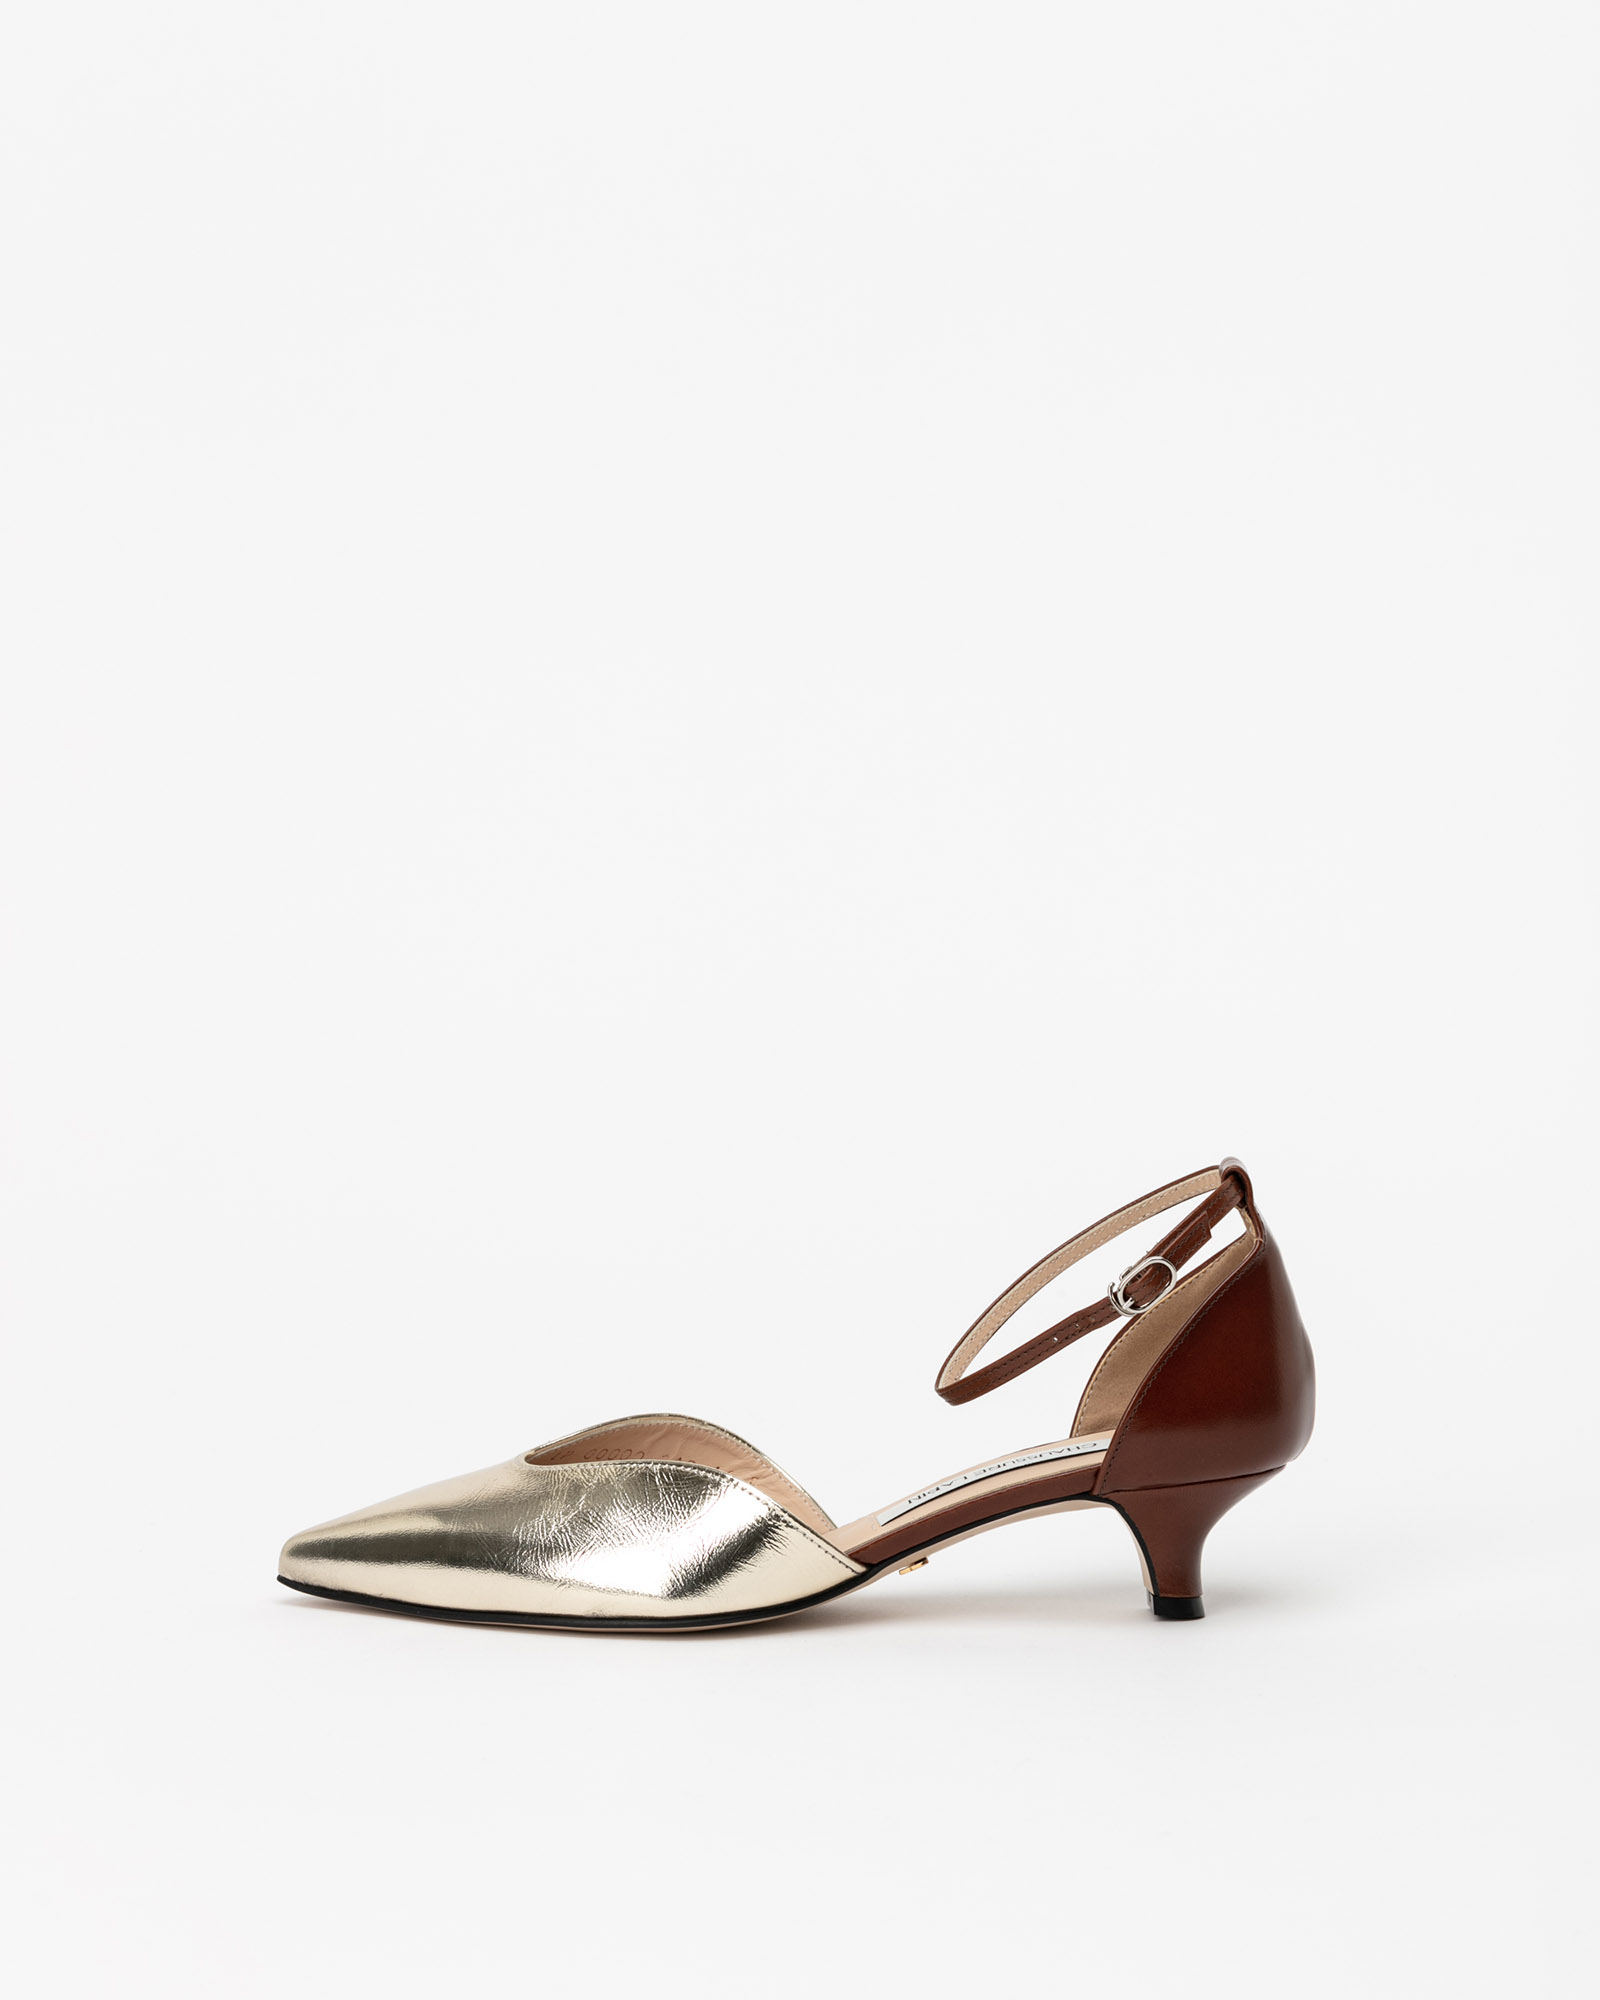 Joffre Side-cut Strap Pumps in Boulder Gold Textured Patent with Brown Textured Kip